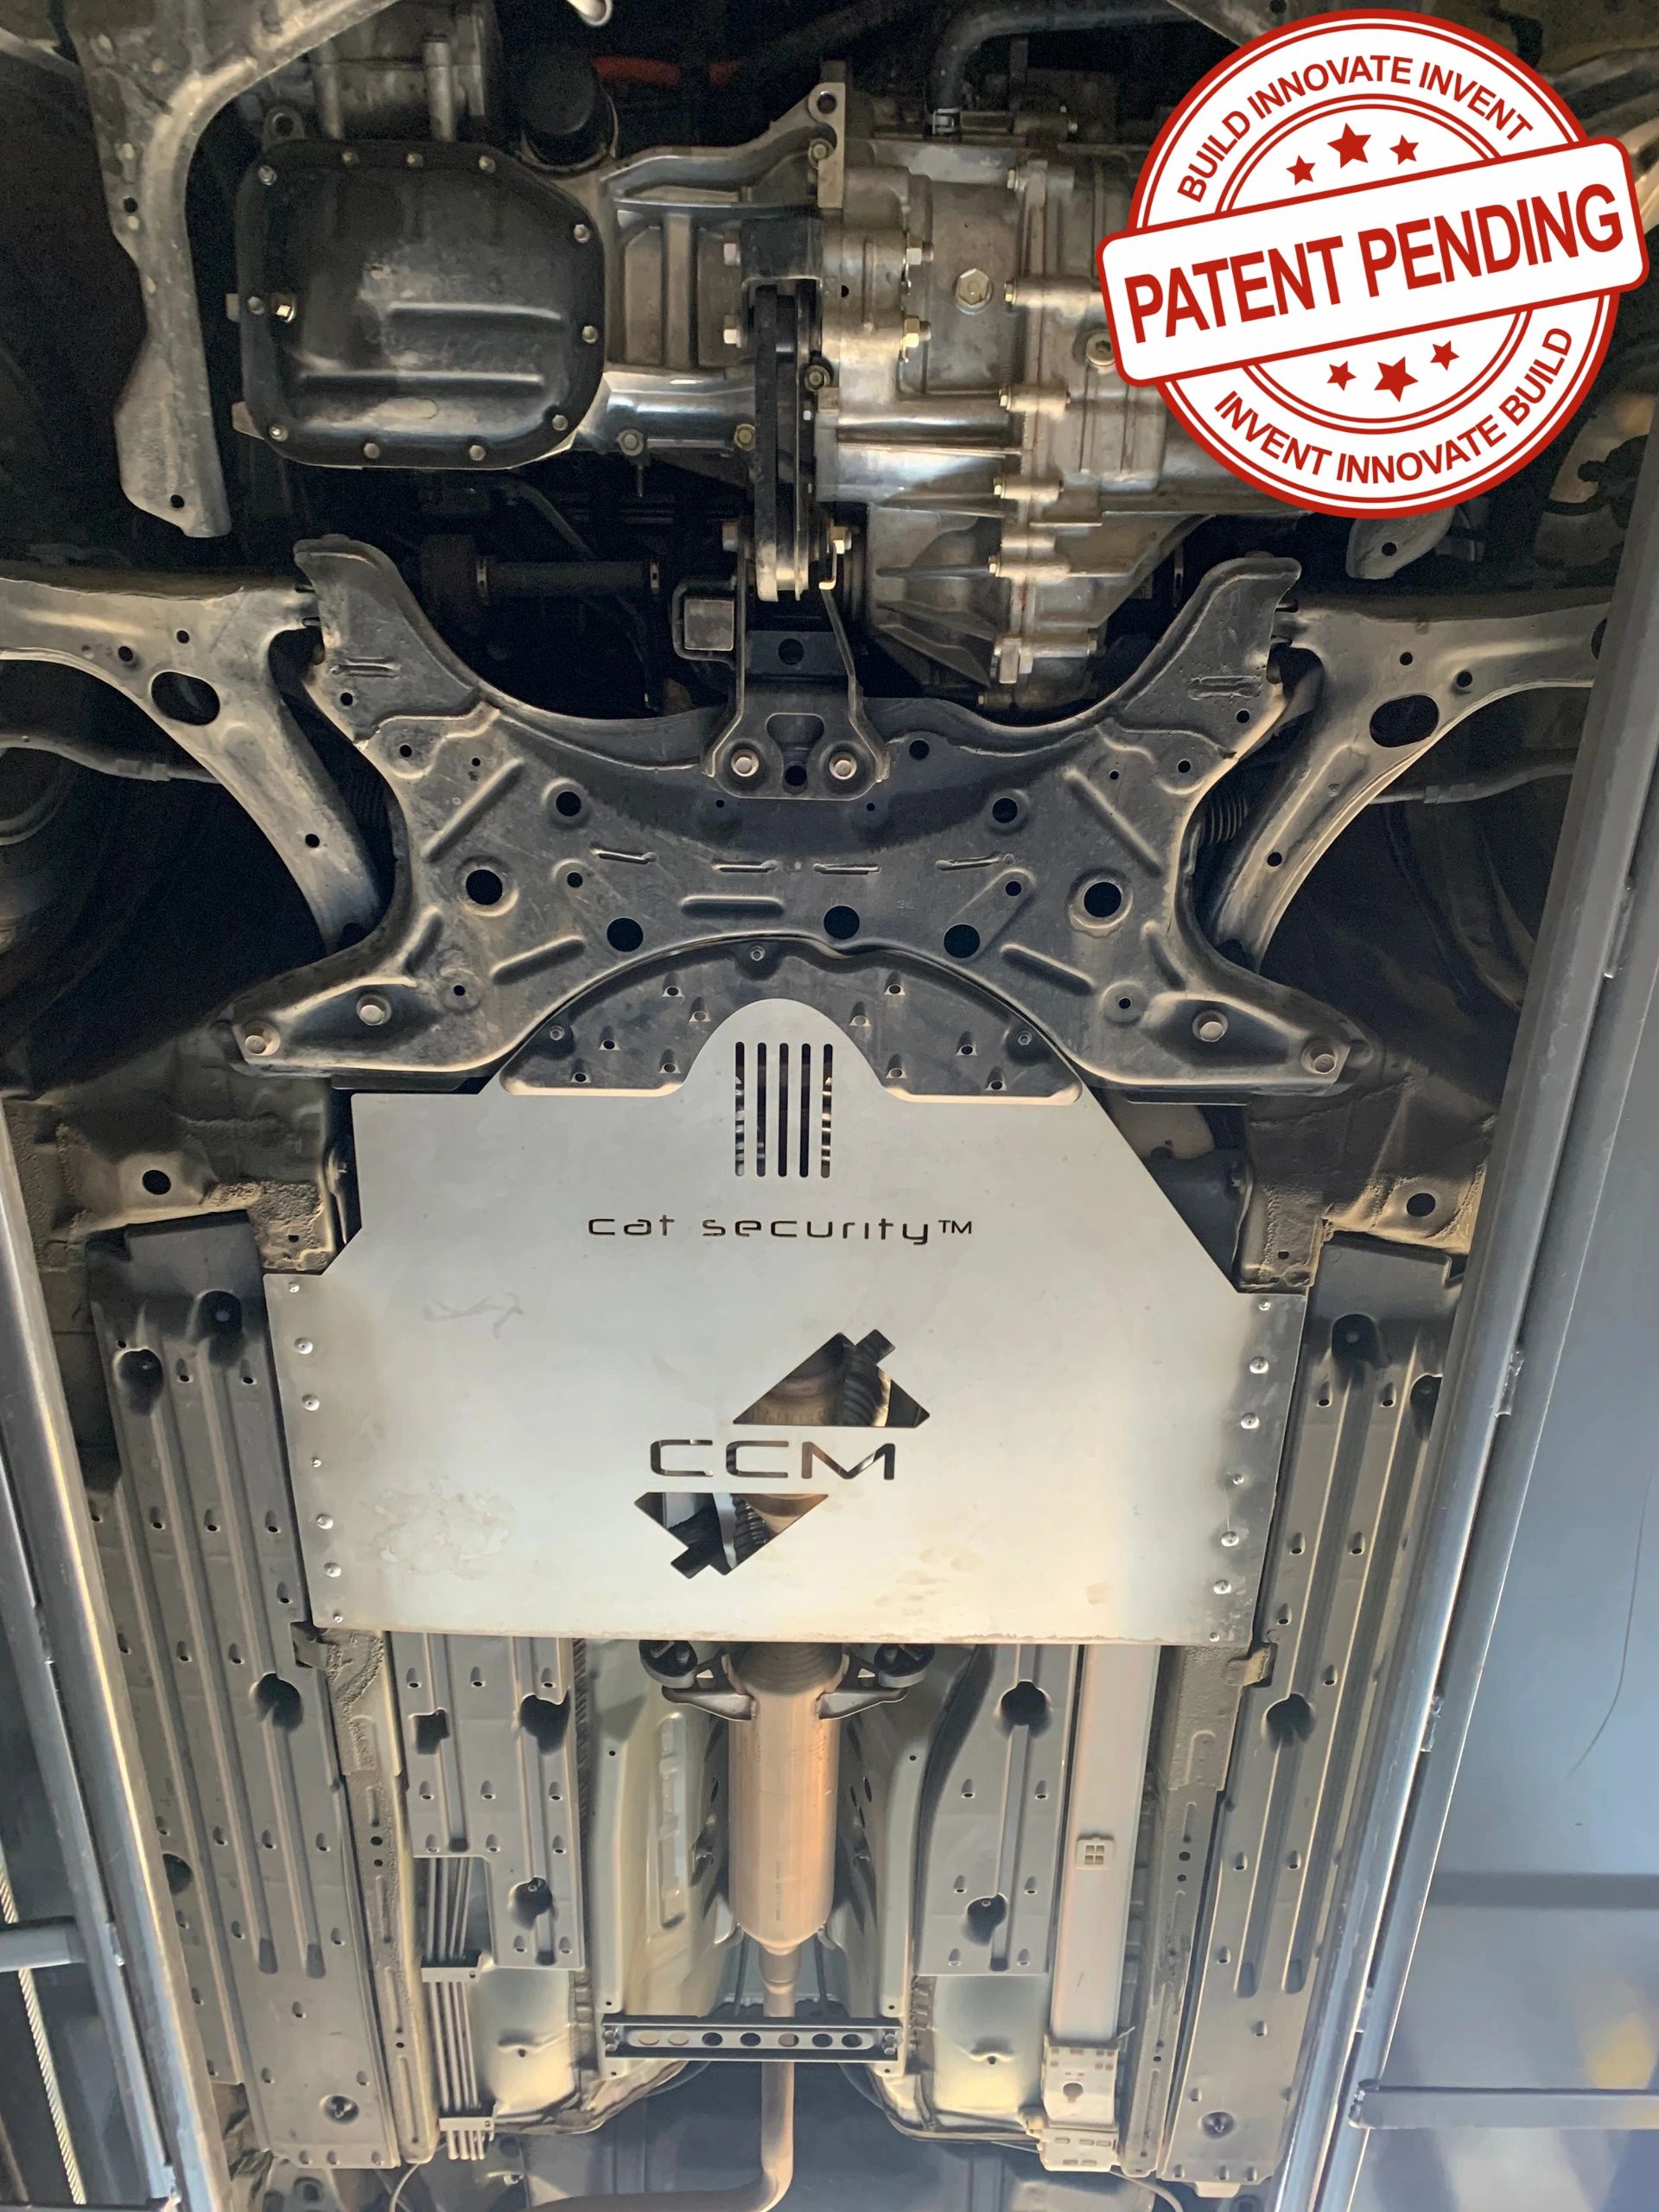 Catalytic Converter Protection GetCatSecurity